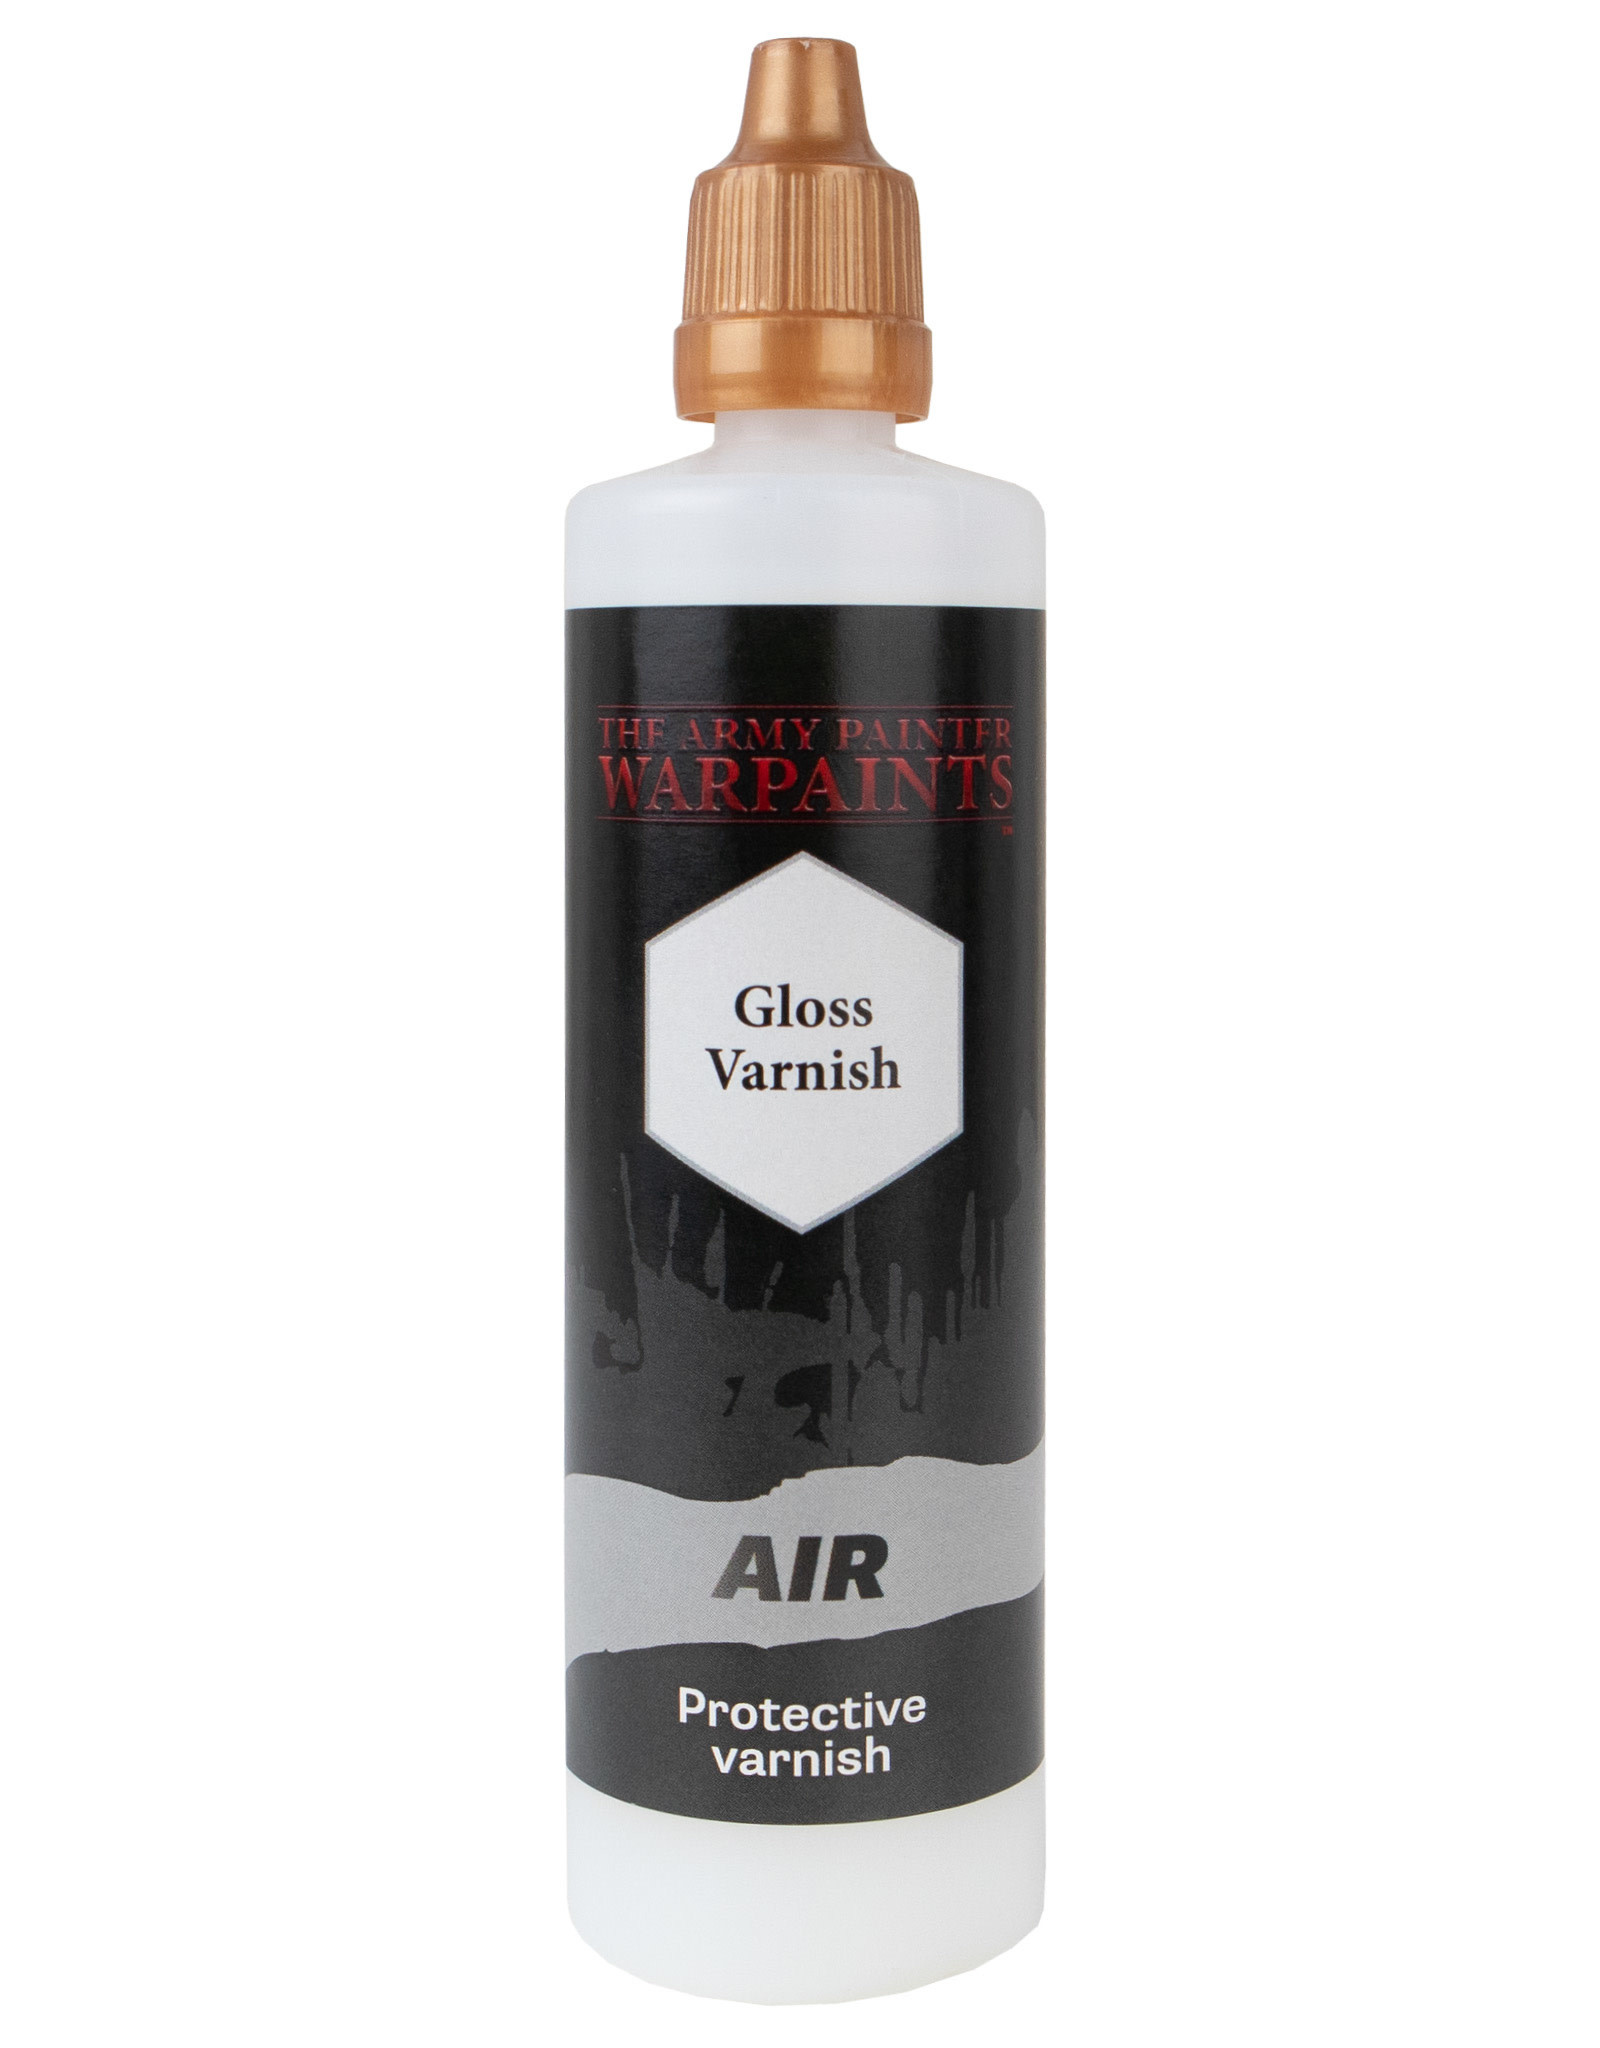 The Army Painter The Army Painter Warpaints Air: Gloss Varnish